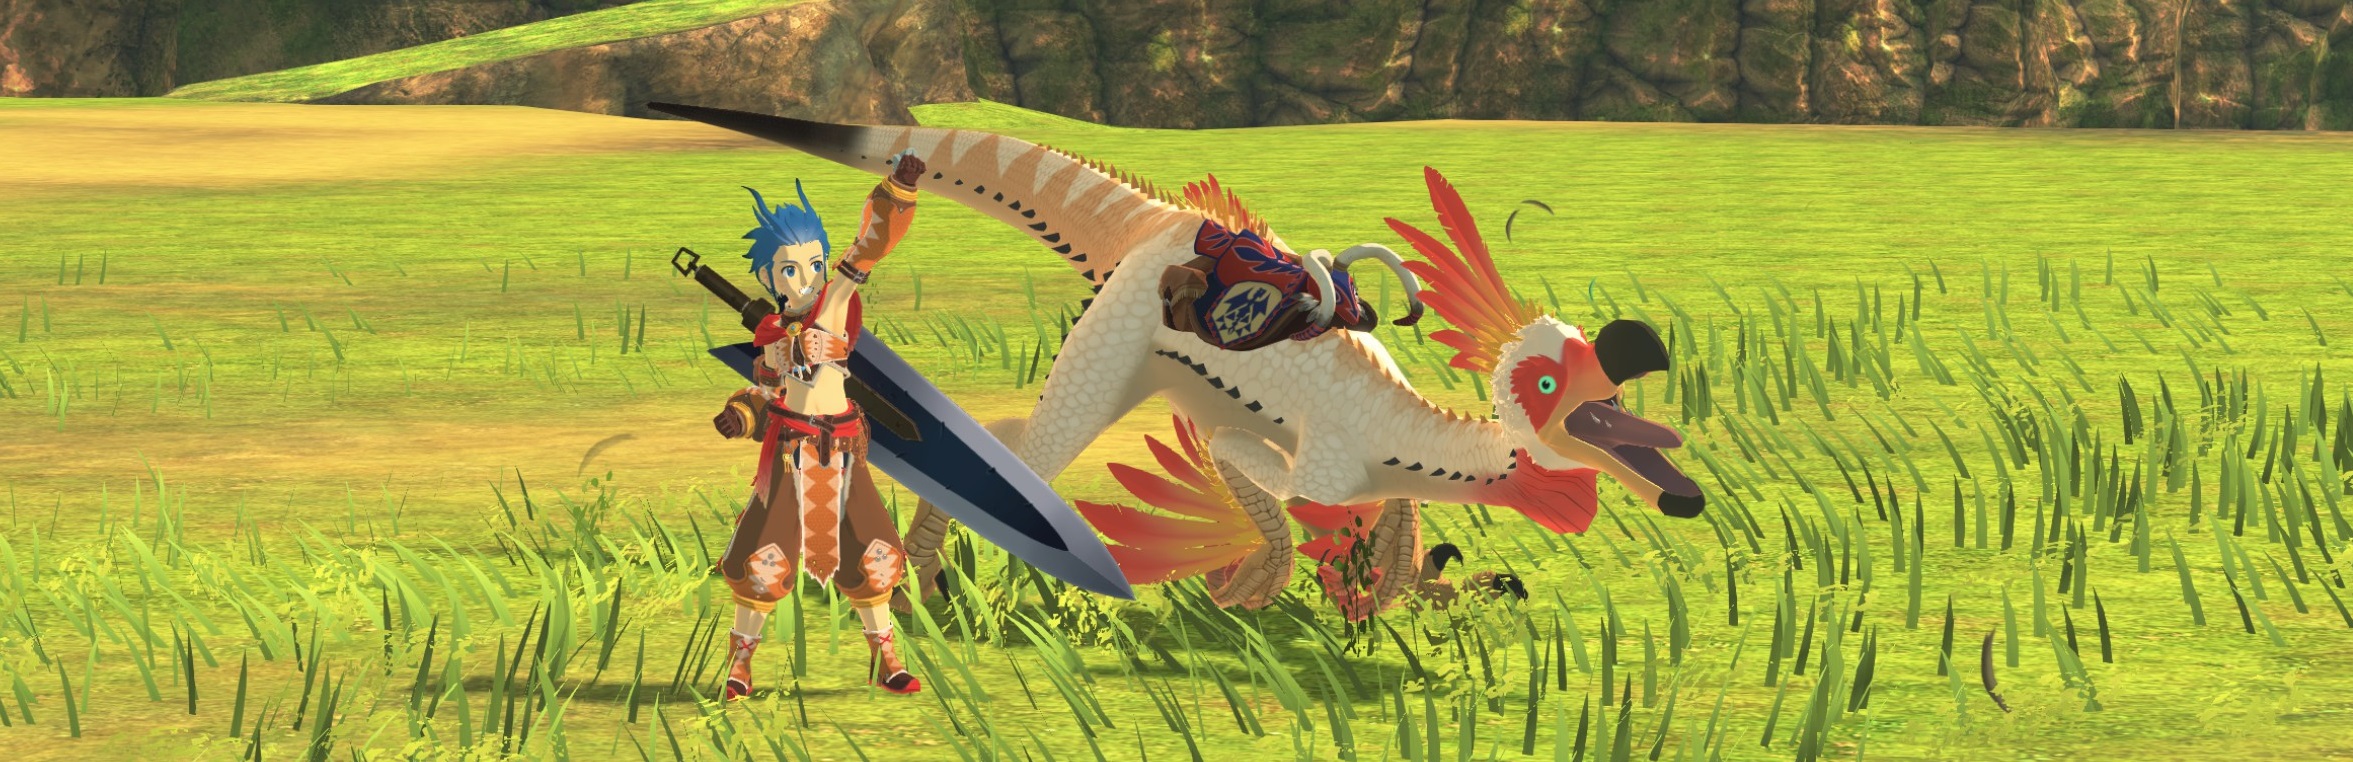 Monster Hunter Stories 2 - 100% Achievement Guide image 196